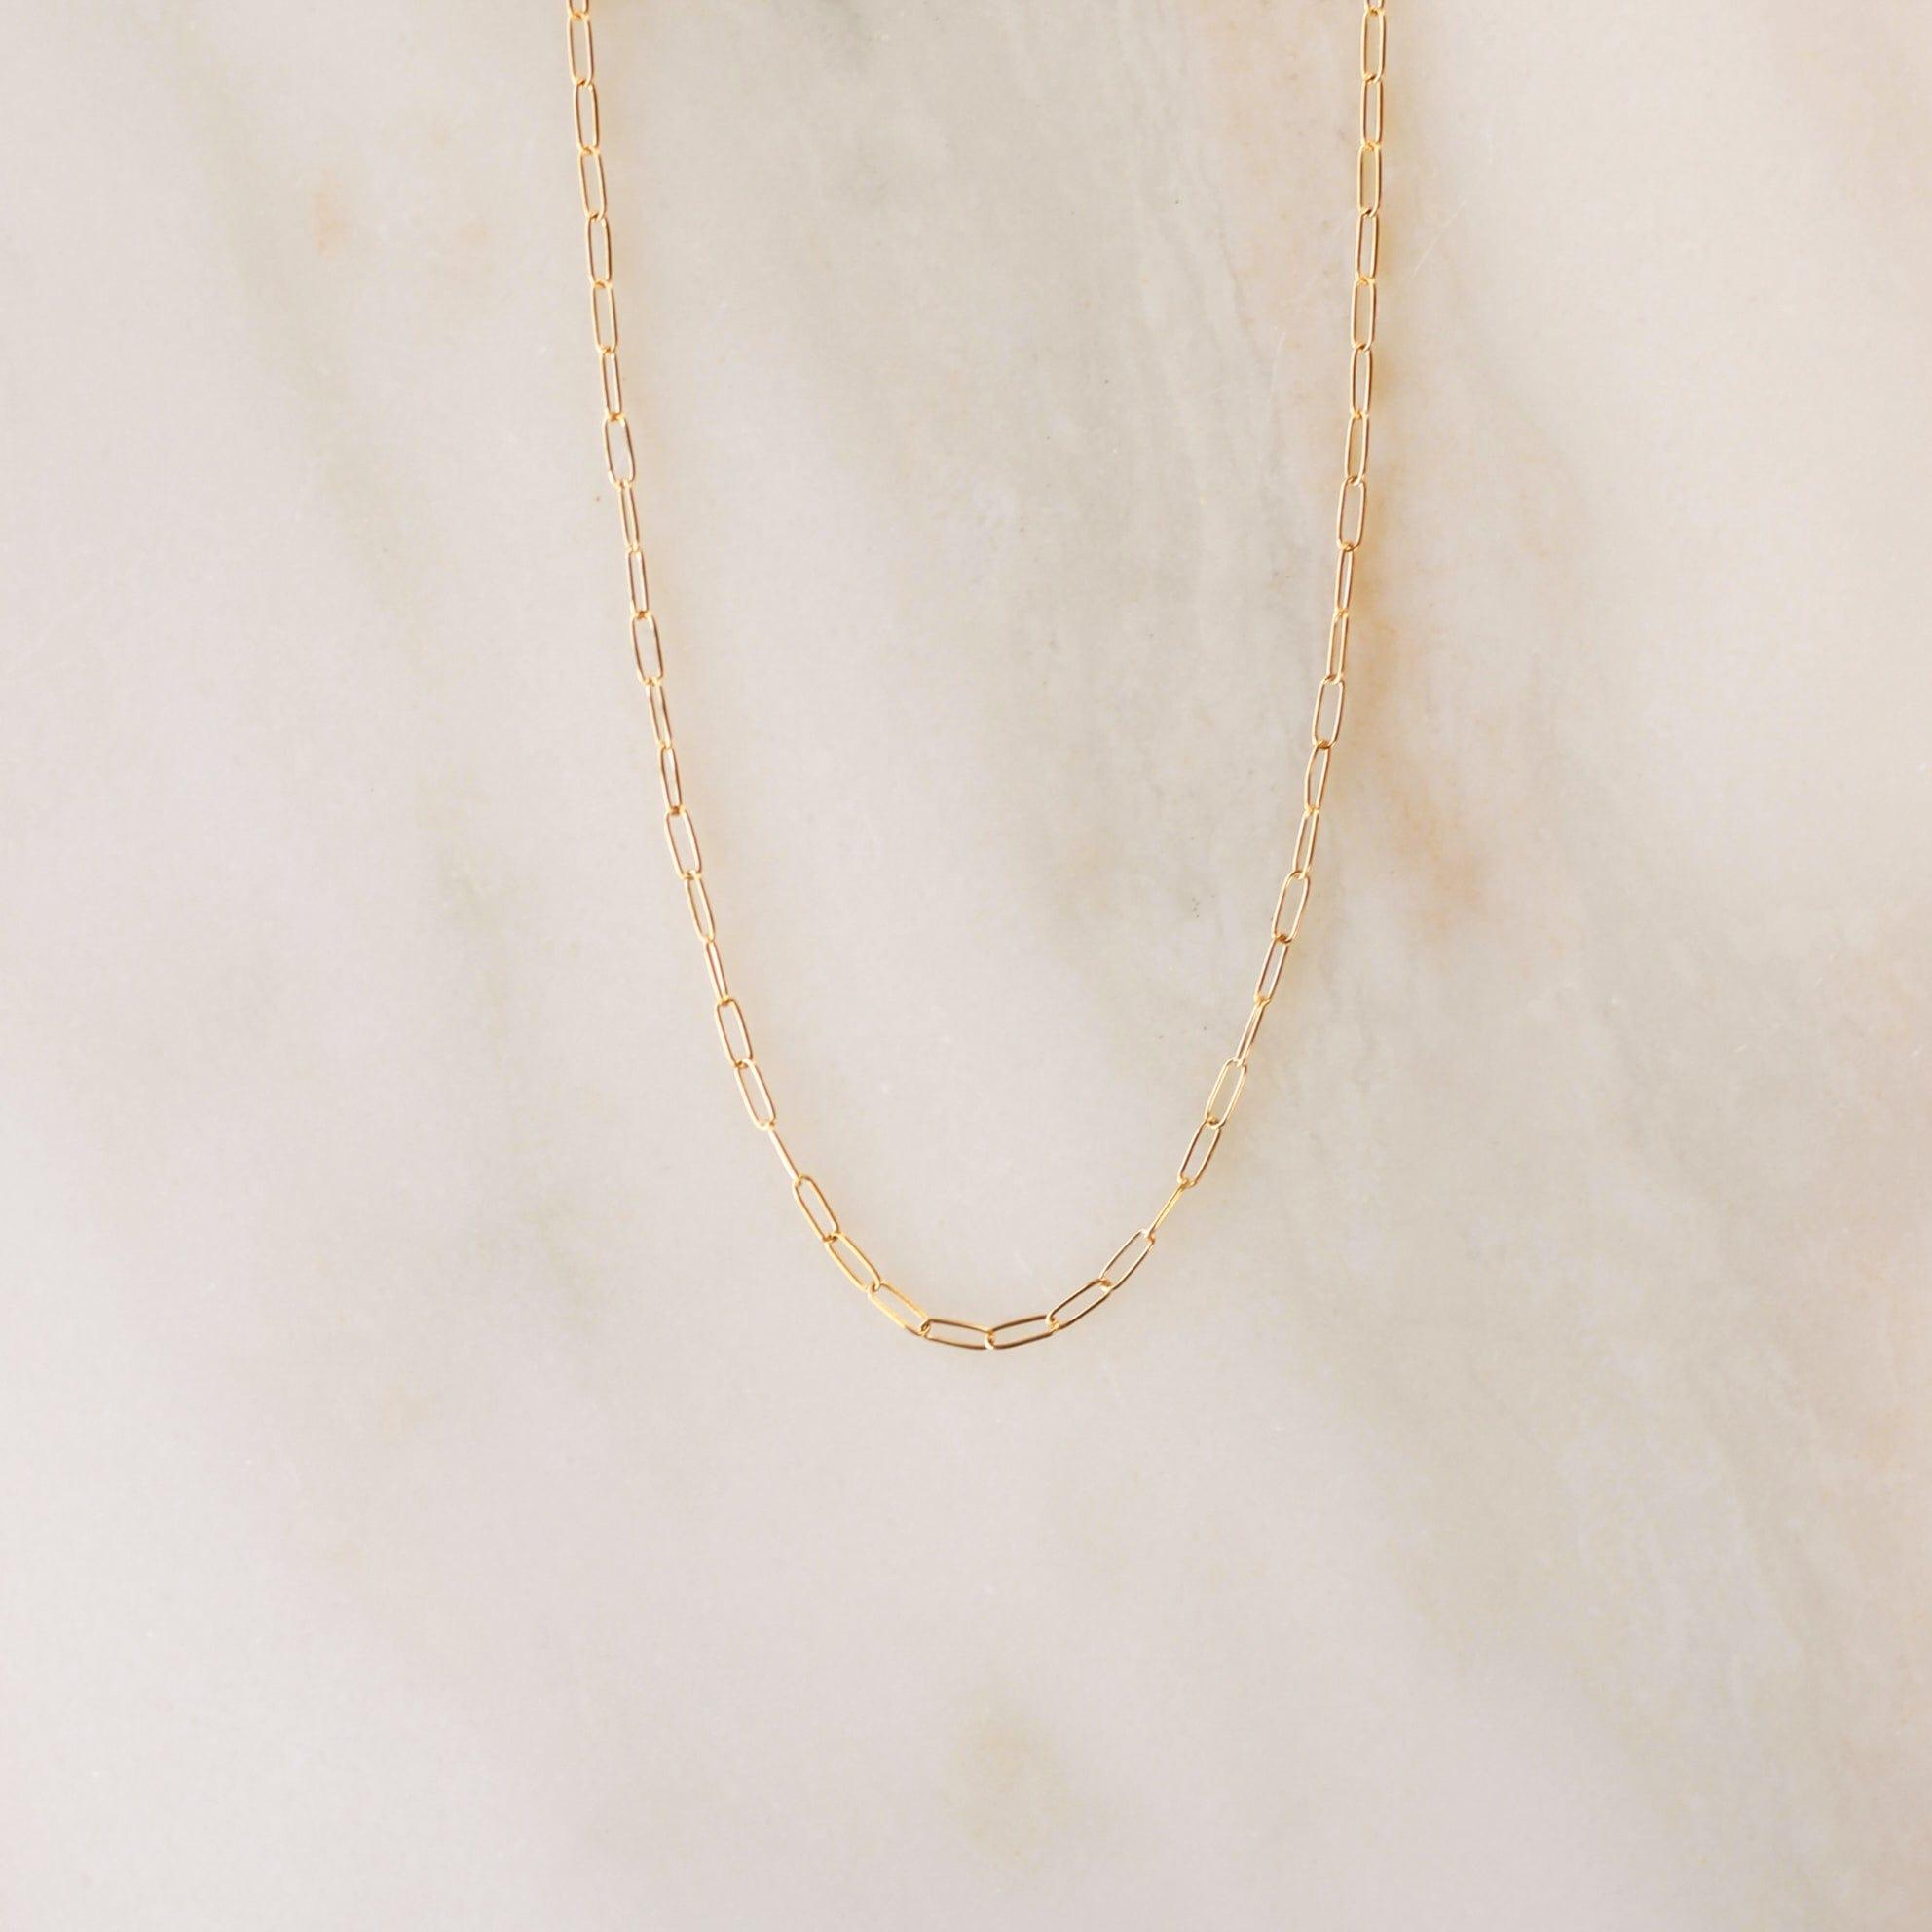 Modern Chain Necklace - Nolia Jewelry - Meaningful + Sustainably Handcrafted Jewelry